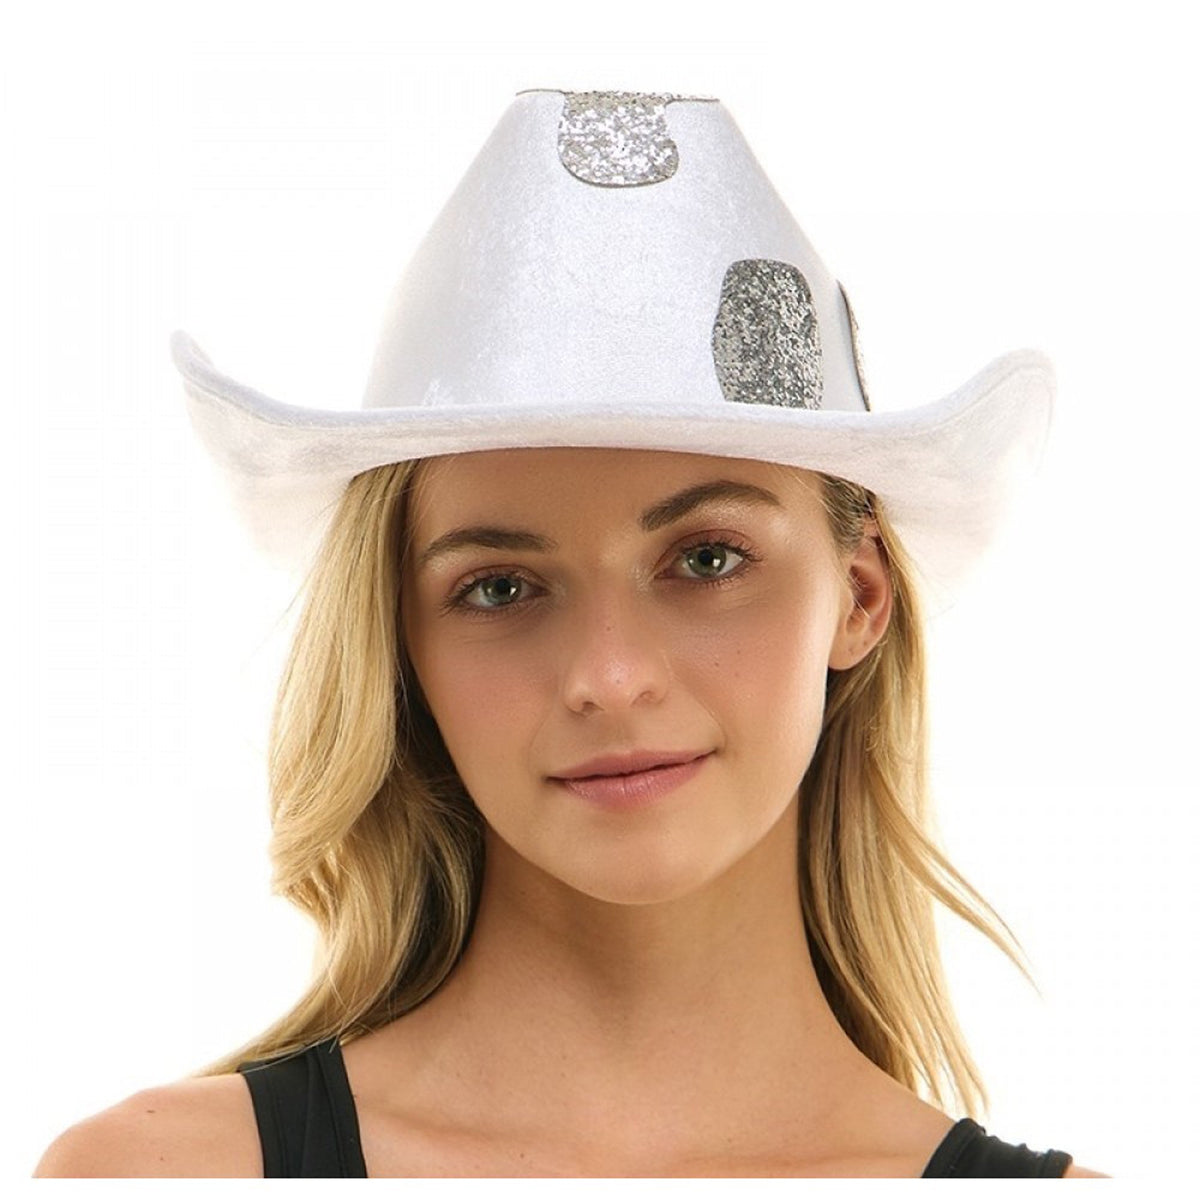 KBW GLOBAL CORP Costume Accessories Silver Cowprint Cowboy Hat for Adults